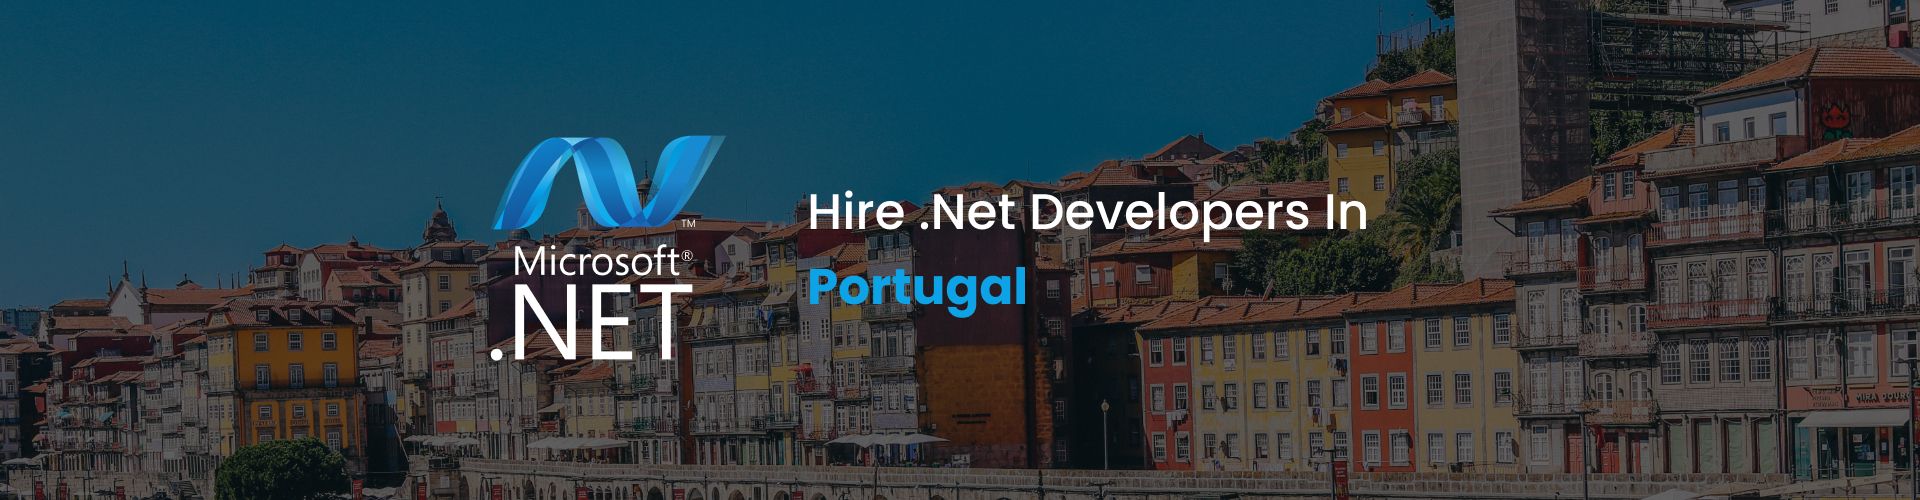 hire .net developers in portugal